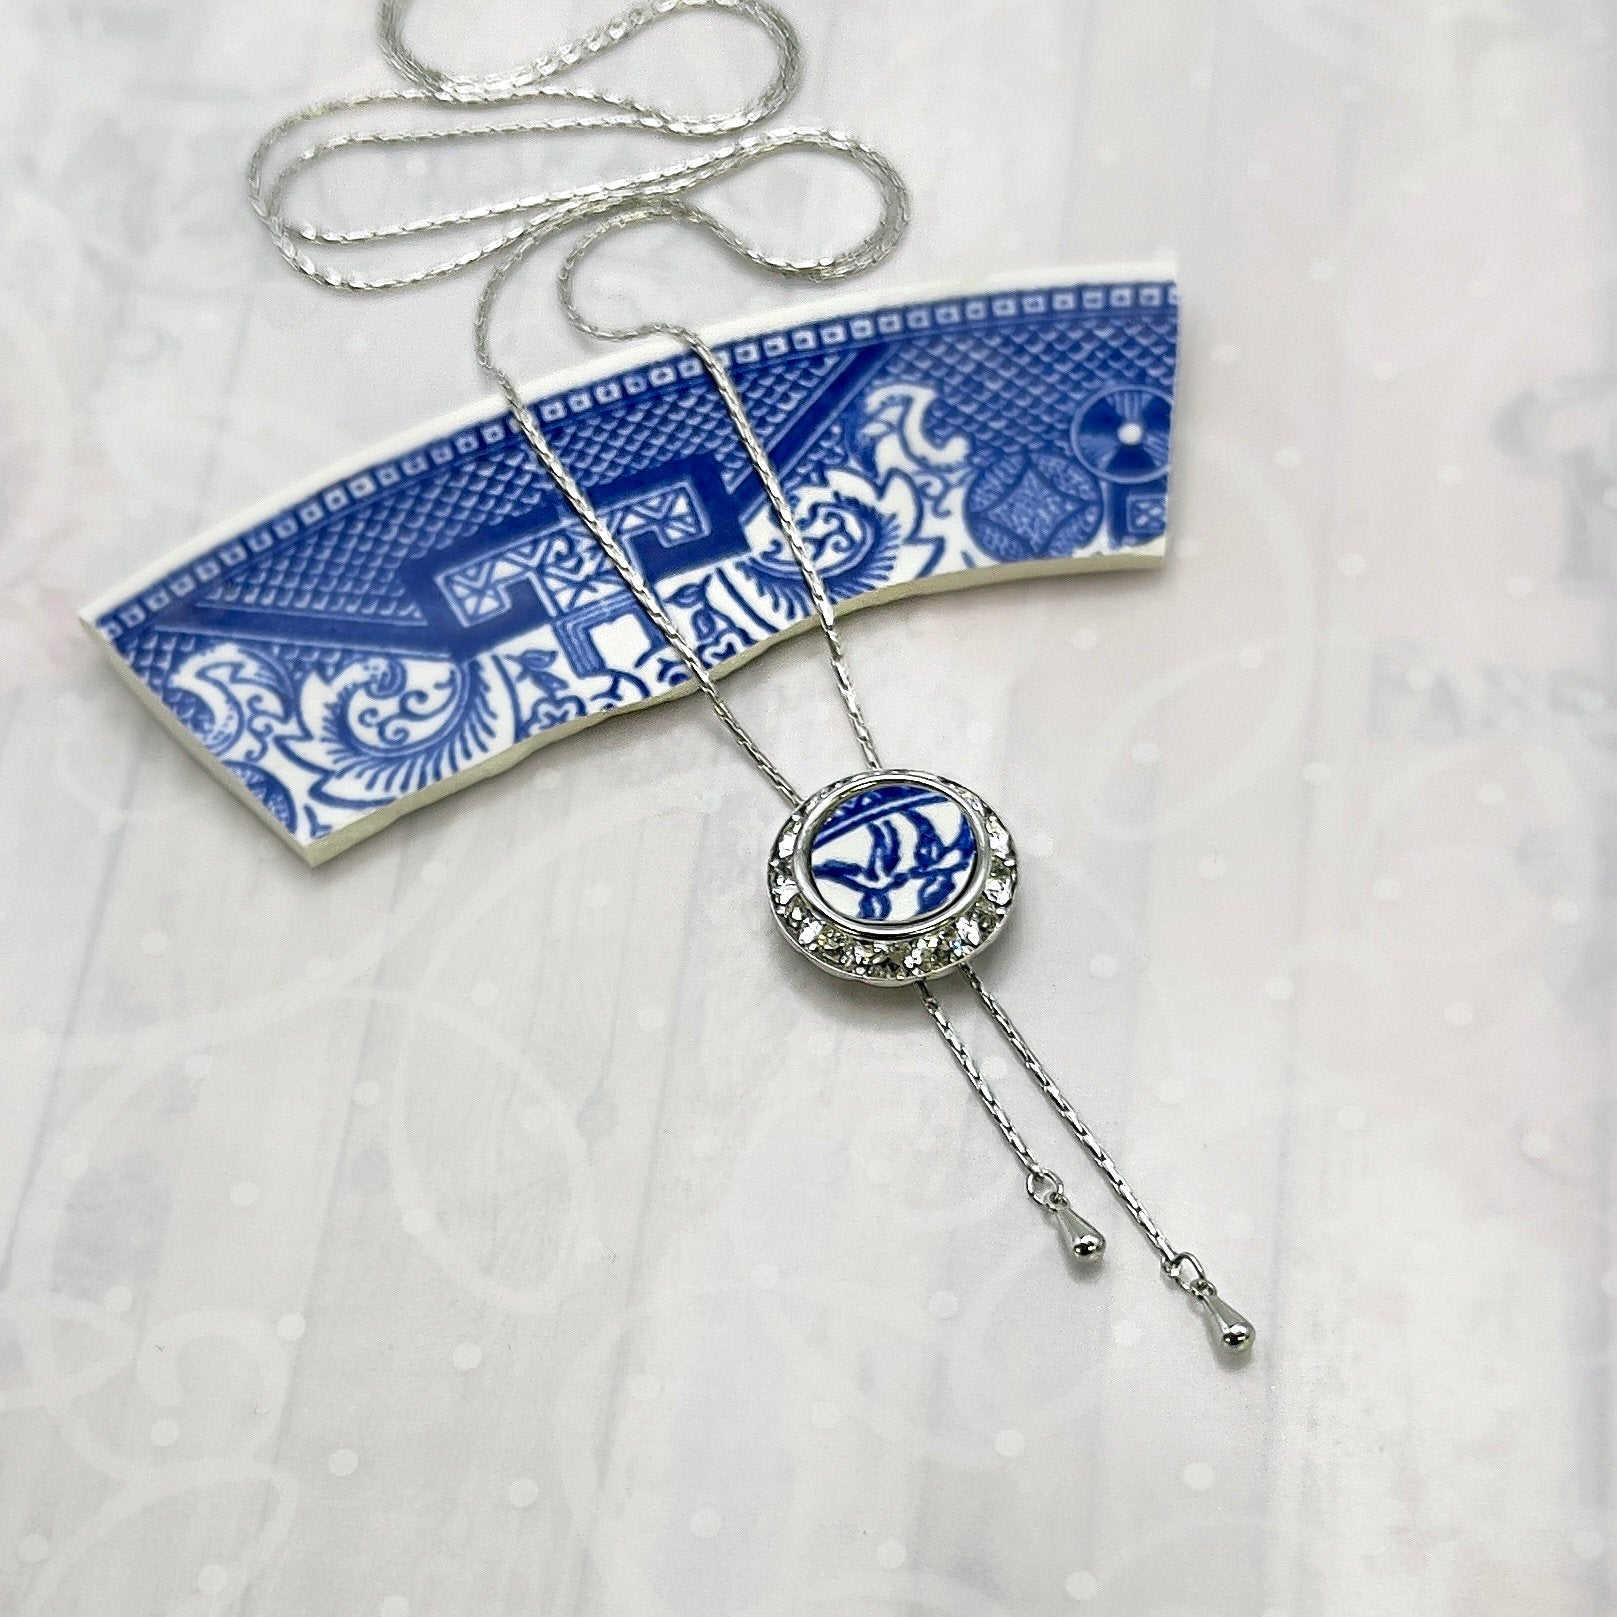 Adjustable Blue Willow Lariat Necklace, Broken China Jewelry Love Birds, Unique Anniversary Gifts